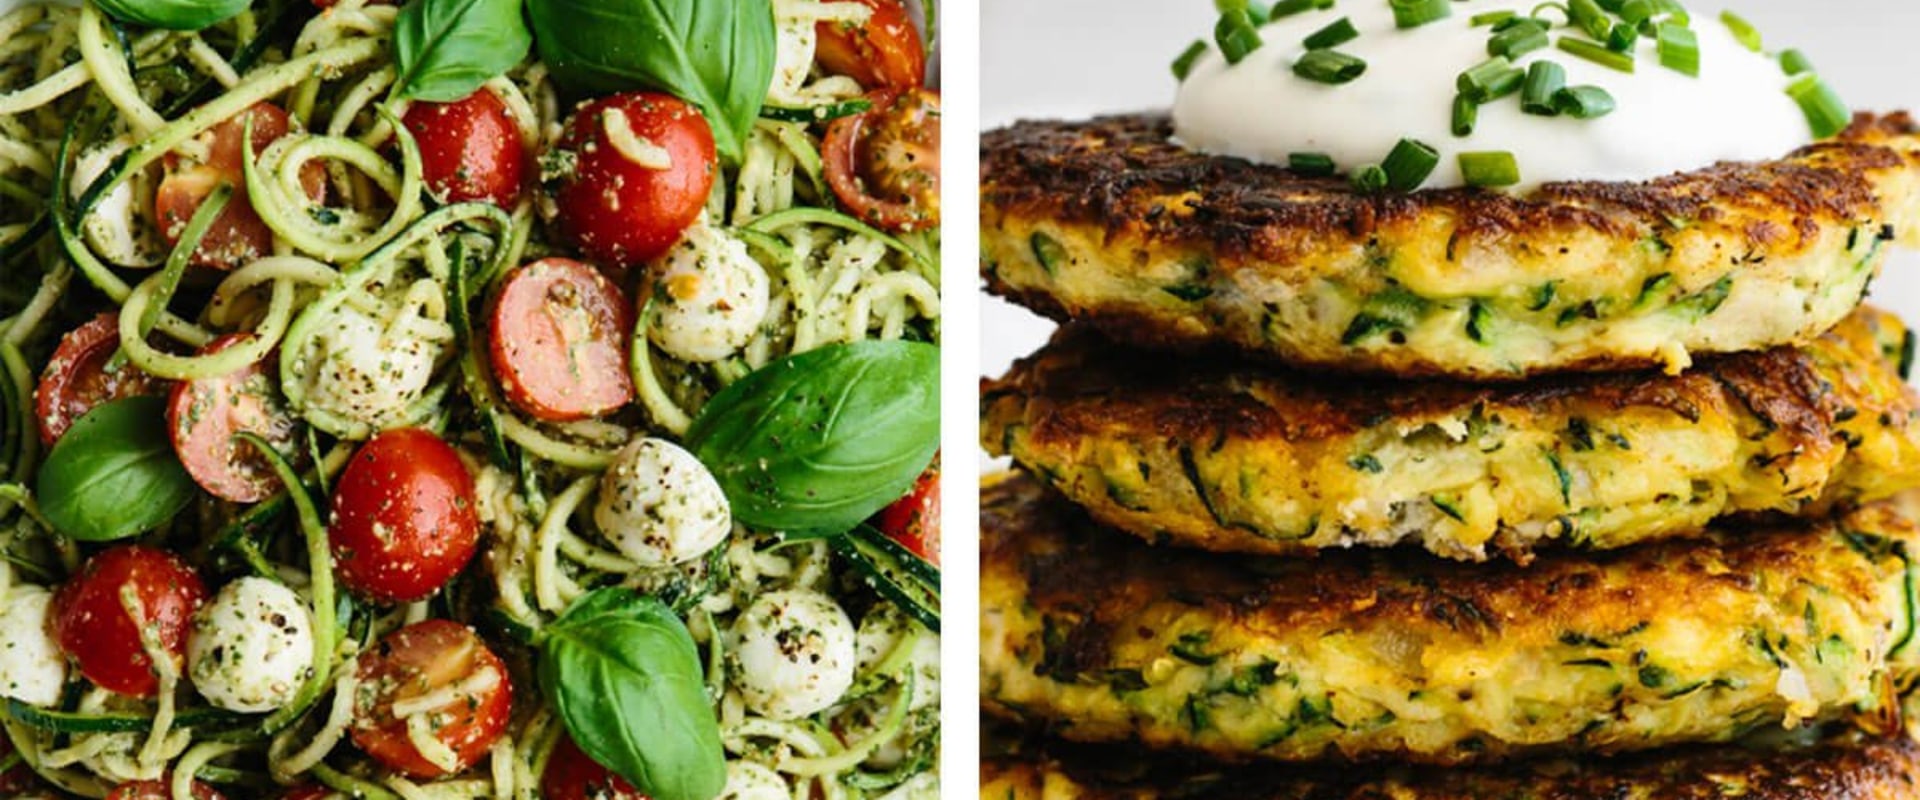 Vegetarian Dinner Recipes: Easy and Healthy Ideas